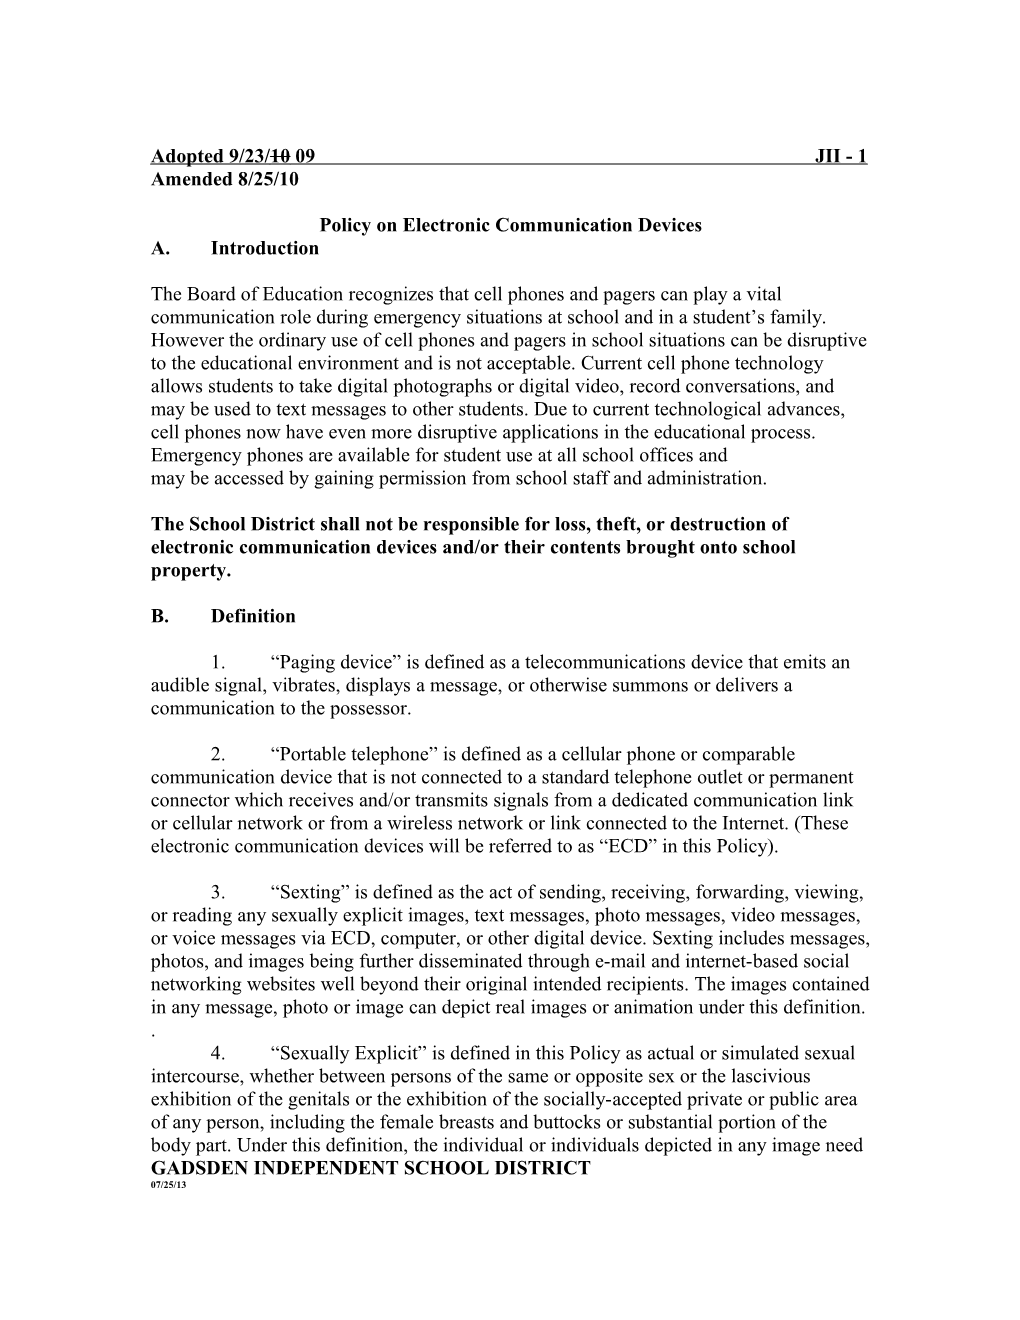 Policy on Electronic Communication Devices